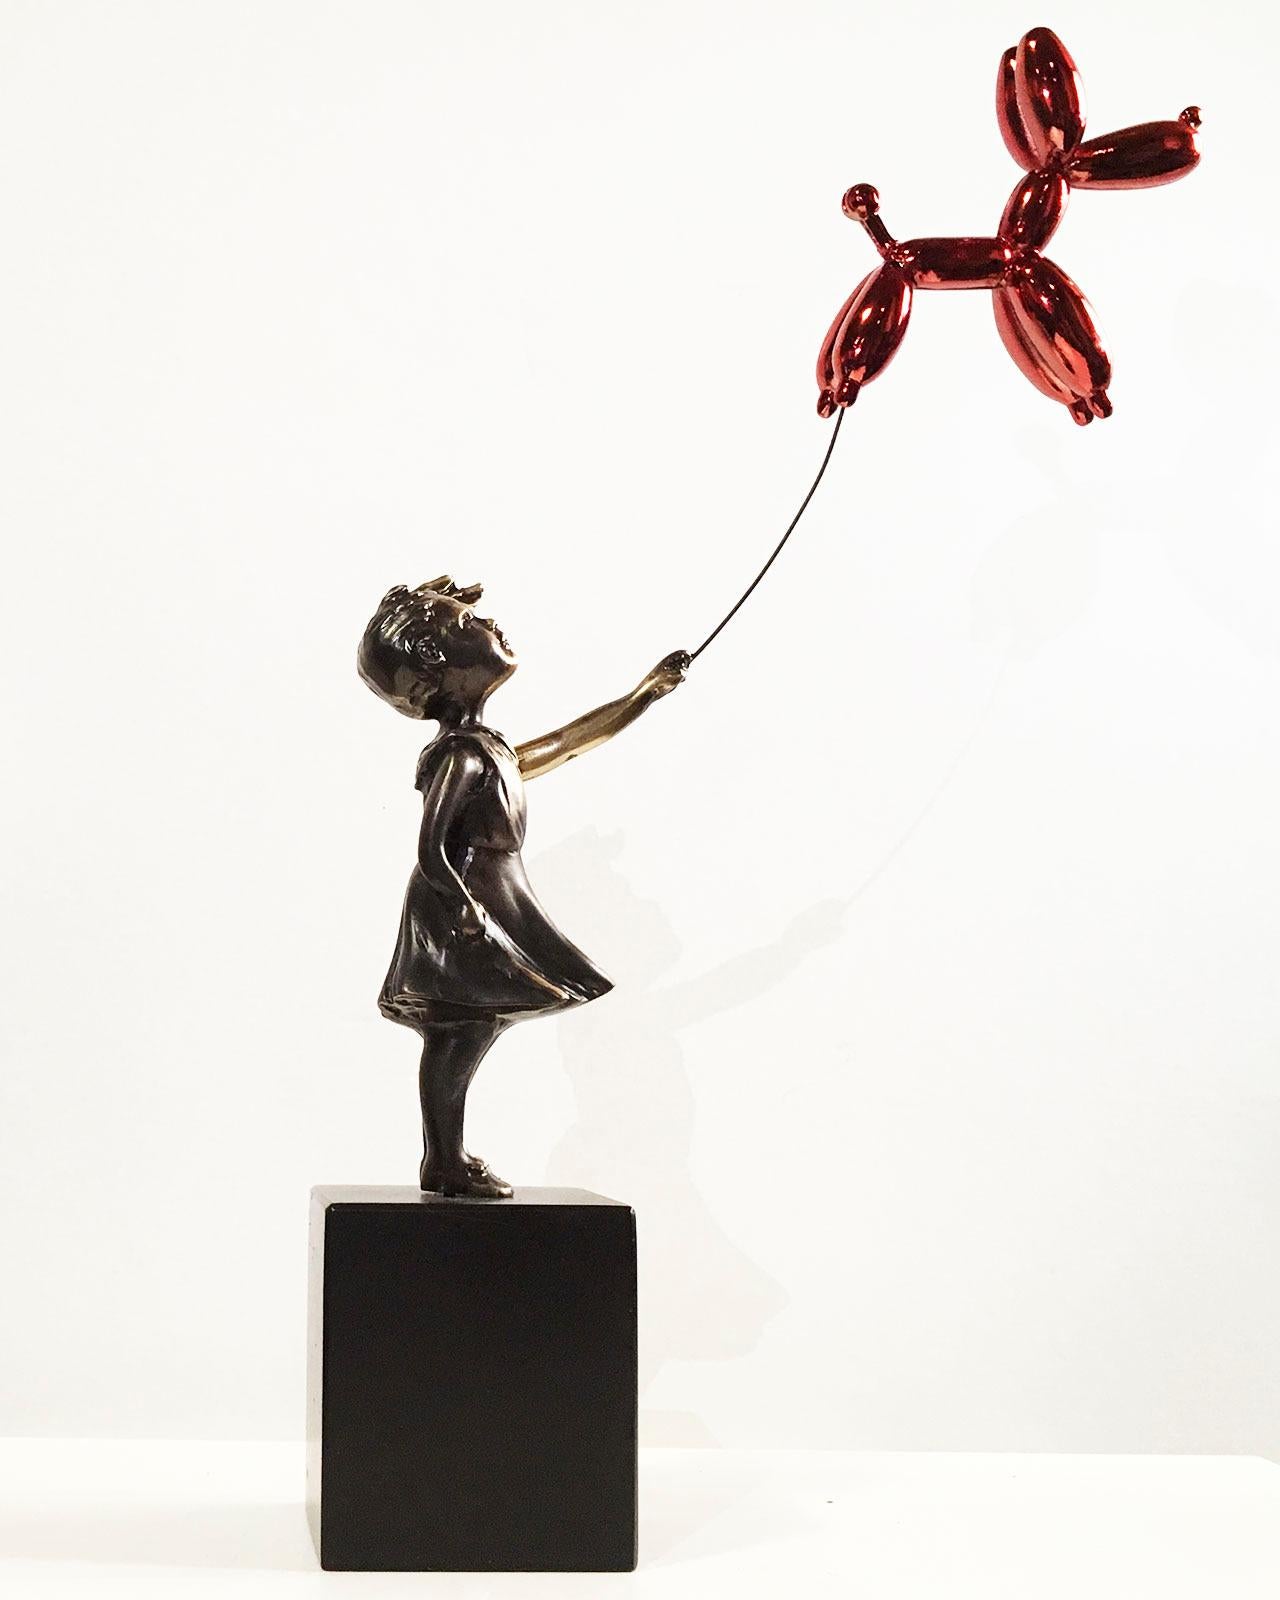 Street Art Sculpture "Girl with balloon dog" by Miguel Guía.
This sculpture is made by lost wax bronze casting.
Limited edition of 299 works.
Although the required time to deliver a shipment is usually between 3 and 10 days please do not hesitate to